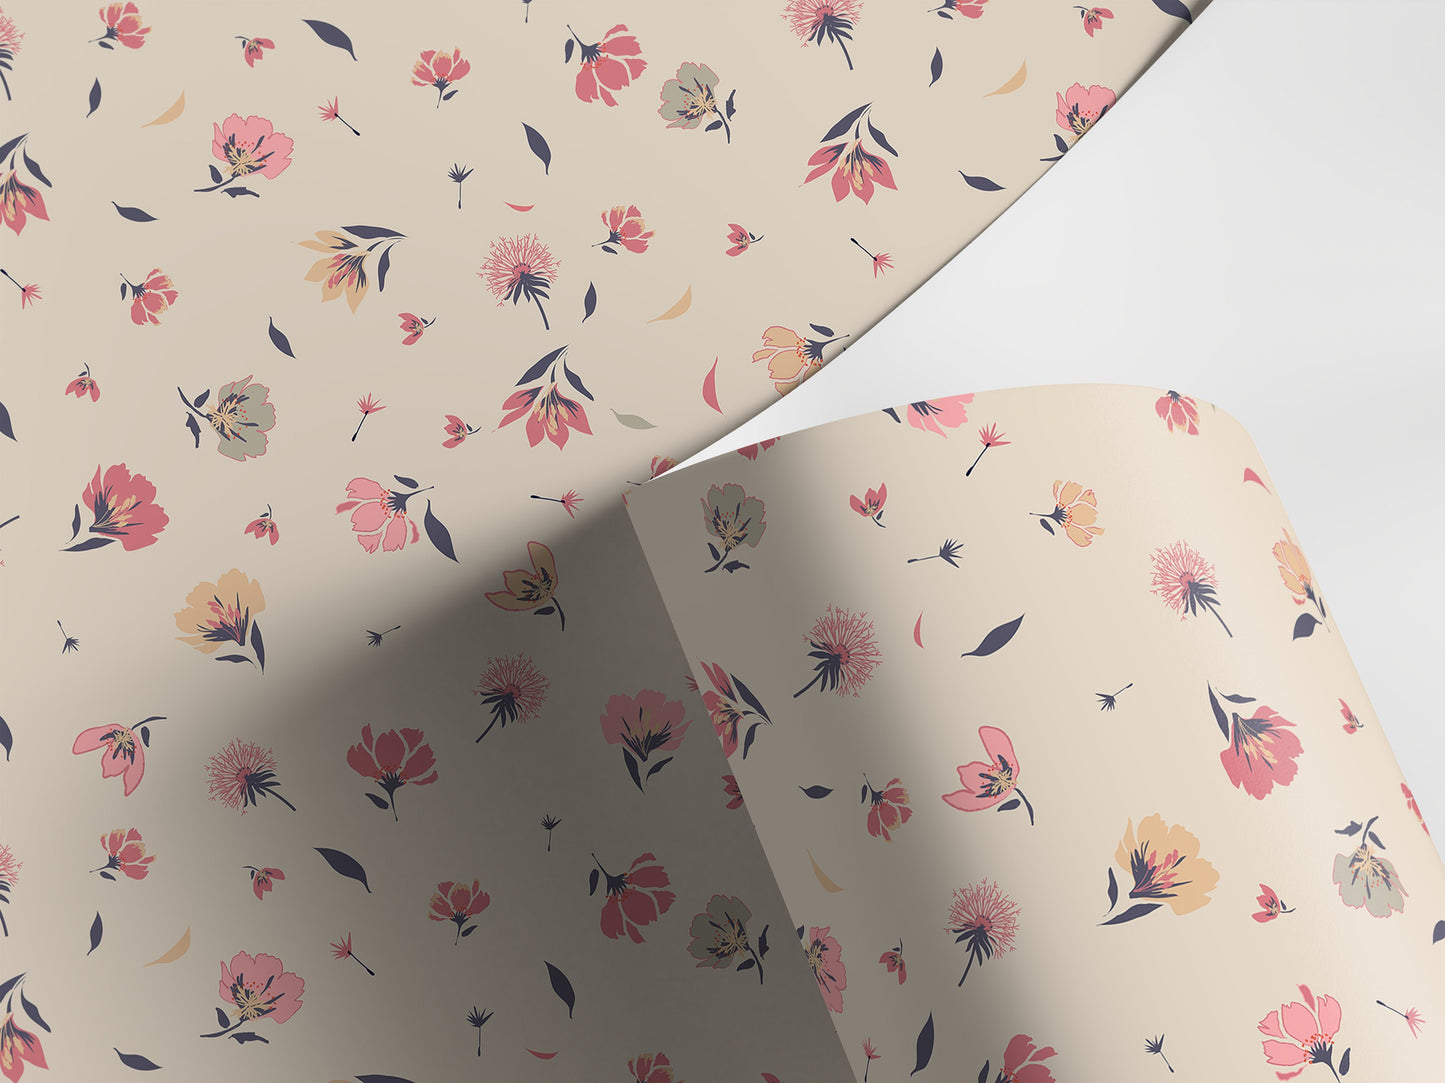 Flower Wallpaper - Removable Wallpaper Peel and Stick Wallpaper Wall Paper Wall - B258